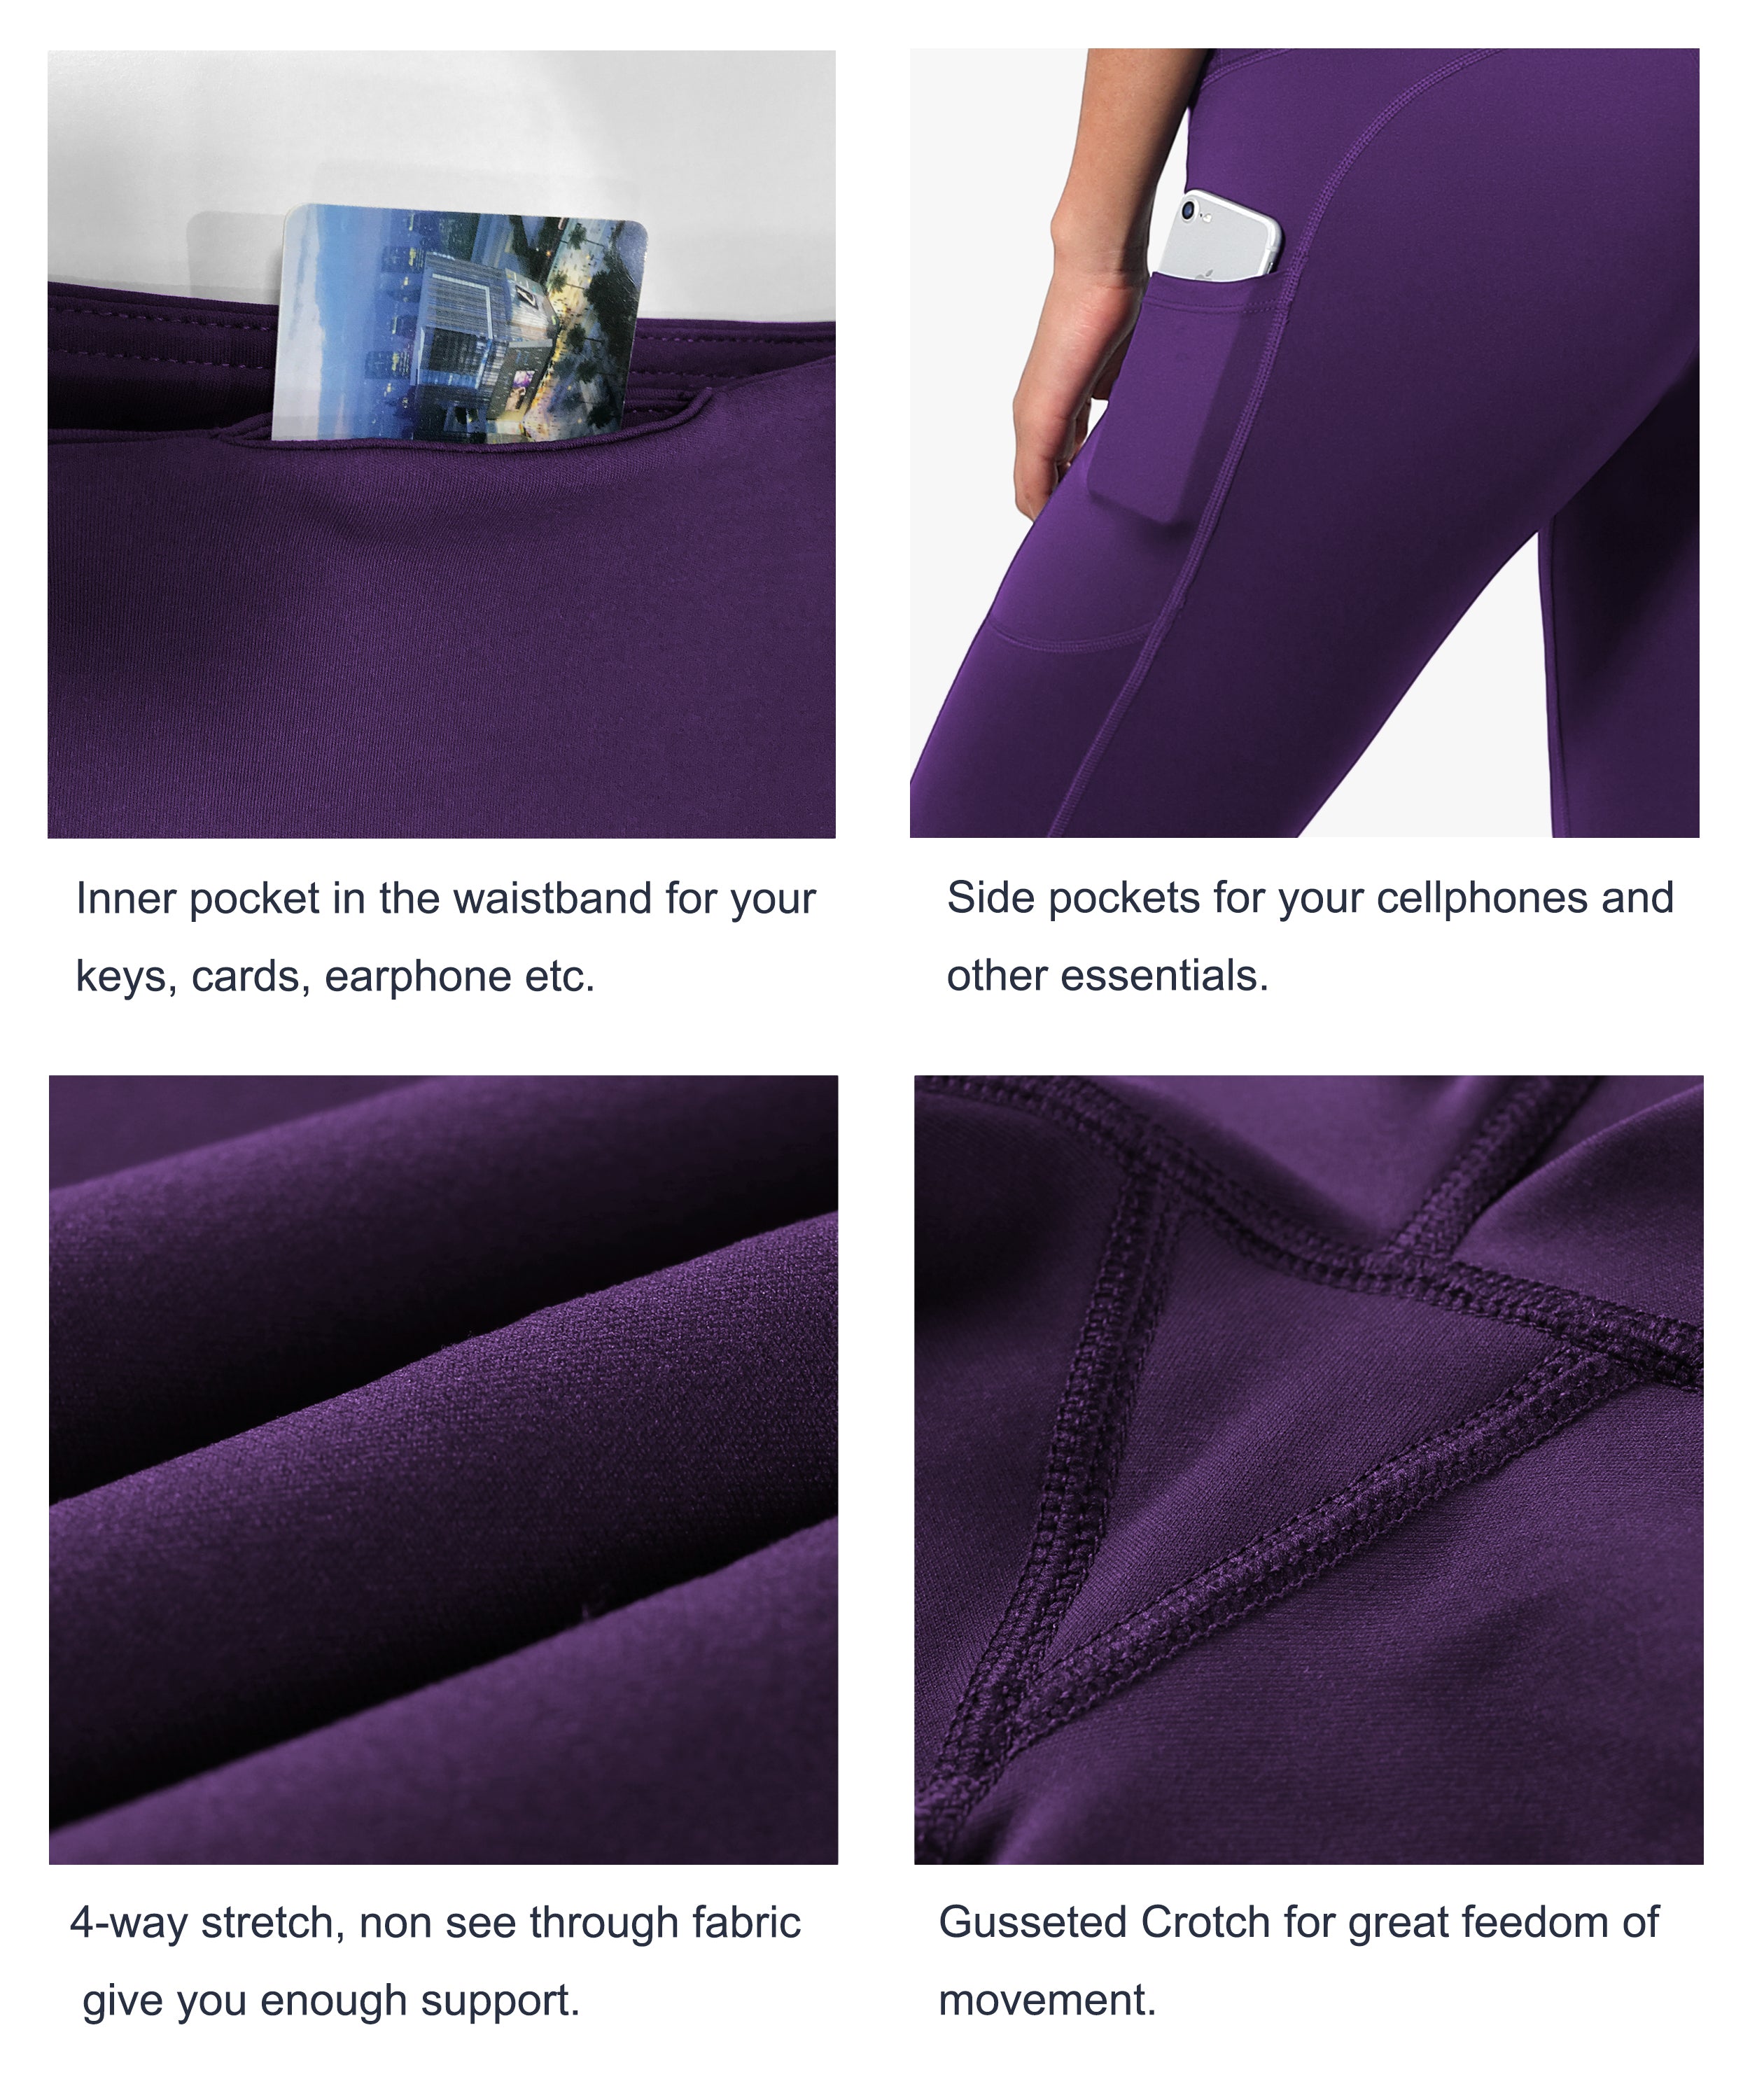 Hip Line Side Pockets Running Pants eggplantpurple Sexy Hip Line Side Pockets 75%Nylon/25%Spandex Fabric doesn't attract lint easily 4-way stretch No see-through Moisture-wicking Tummy control Inner pocket Two lengths